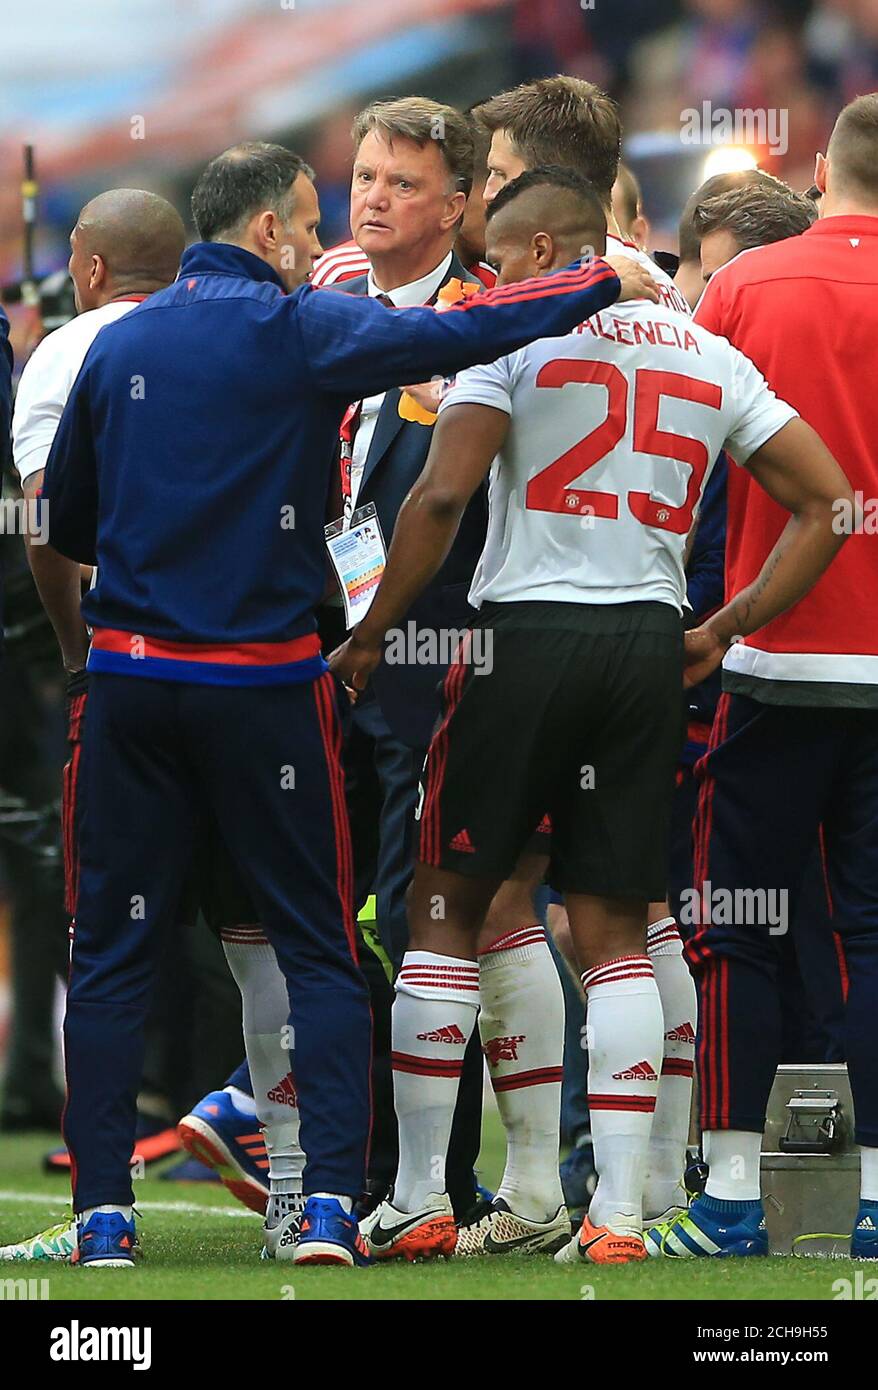 Manchester United assistant manager Ryan Giggs gives Manchester United's Luis Antonio Valencia a pat on the back during the Emirates FA Cup Final at Wembley Stadium. PRESS ASSOCIATION Photo. Picture date: Saturday May 21, 2016. See PA story SOCCER Final. Photo credit should read: Nick Potts/PA Wire. RESTRICTIONS: EDITORIAL USE ONLY No use with unauthorised audio, video, data, fixture lists, club/league logos or 'live' services. Online in-match use limited to 75 images, no video emulation. No use in betting, games or single club/league/player publications. Stock Photo